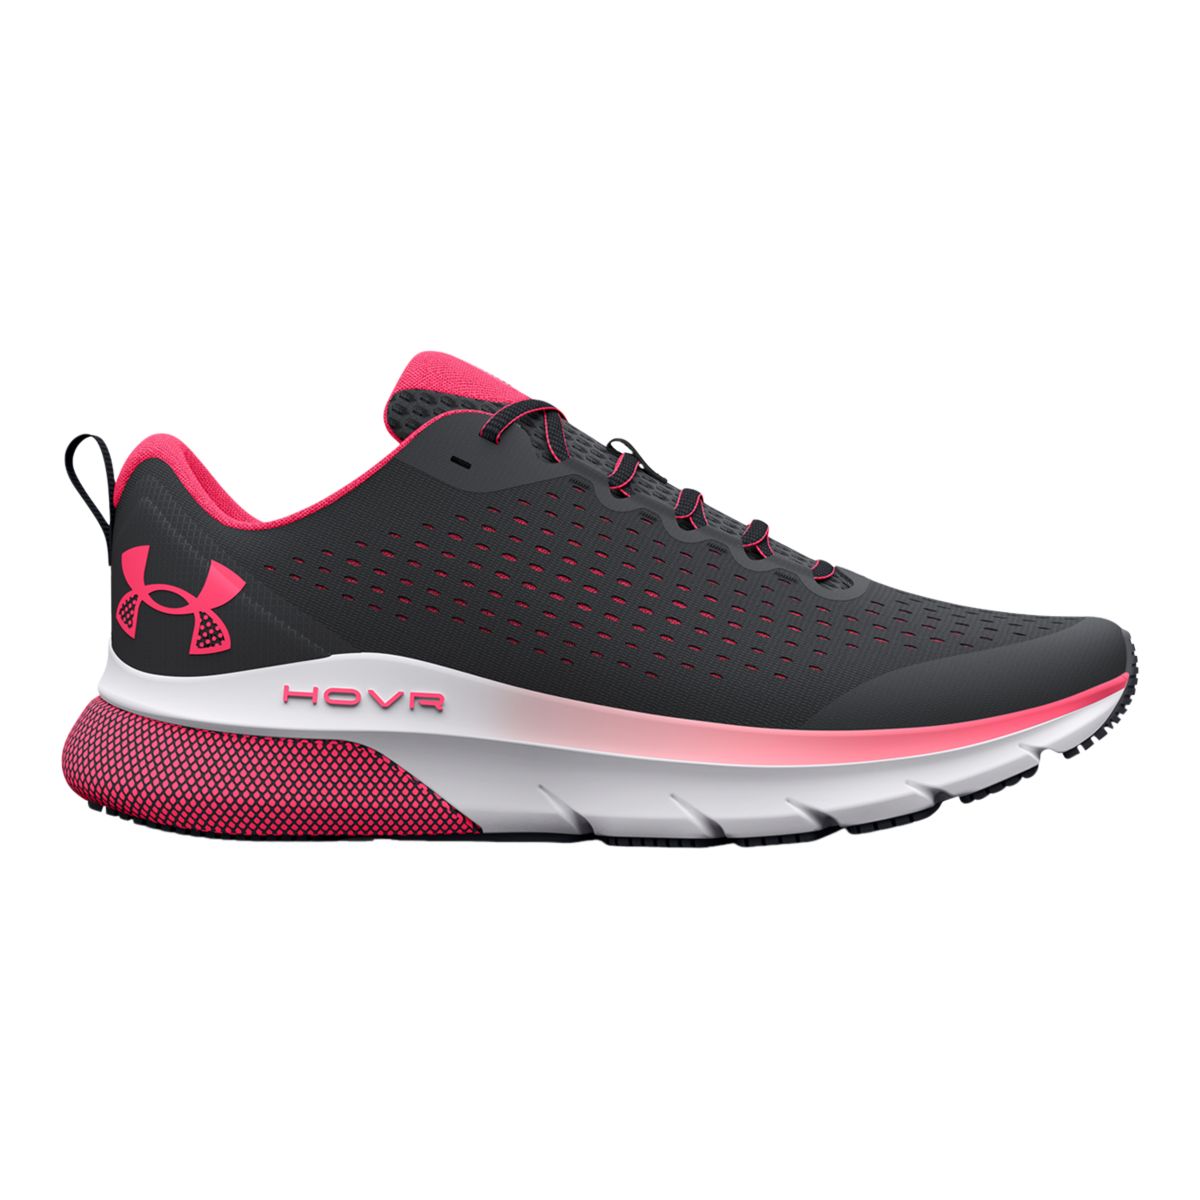 UNDER ARMOUR Women's HOVR Infinite 2 Running Shoes